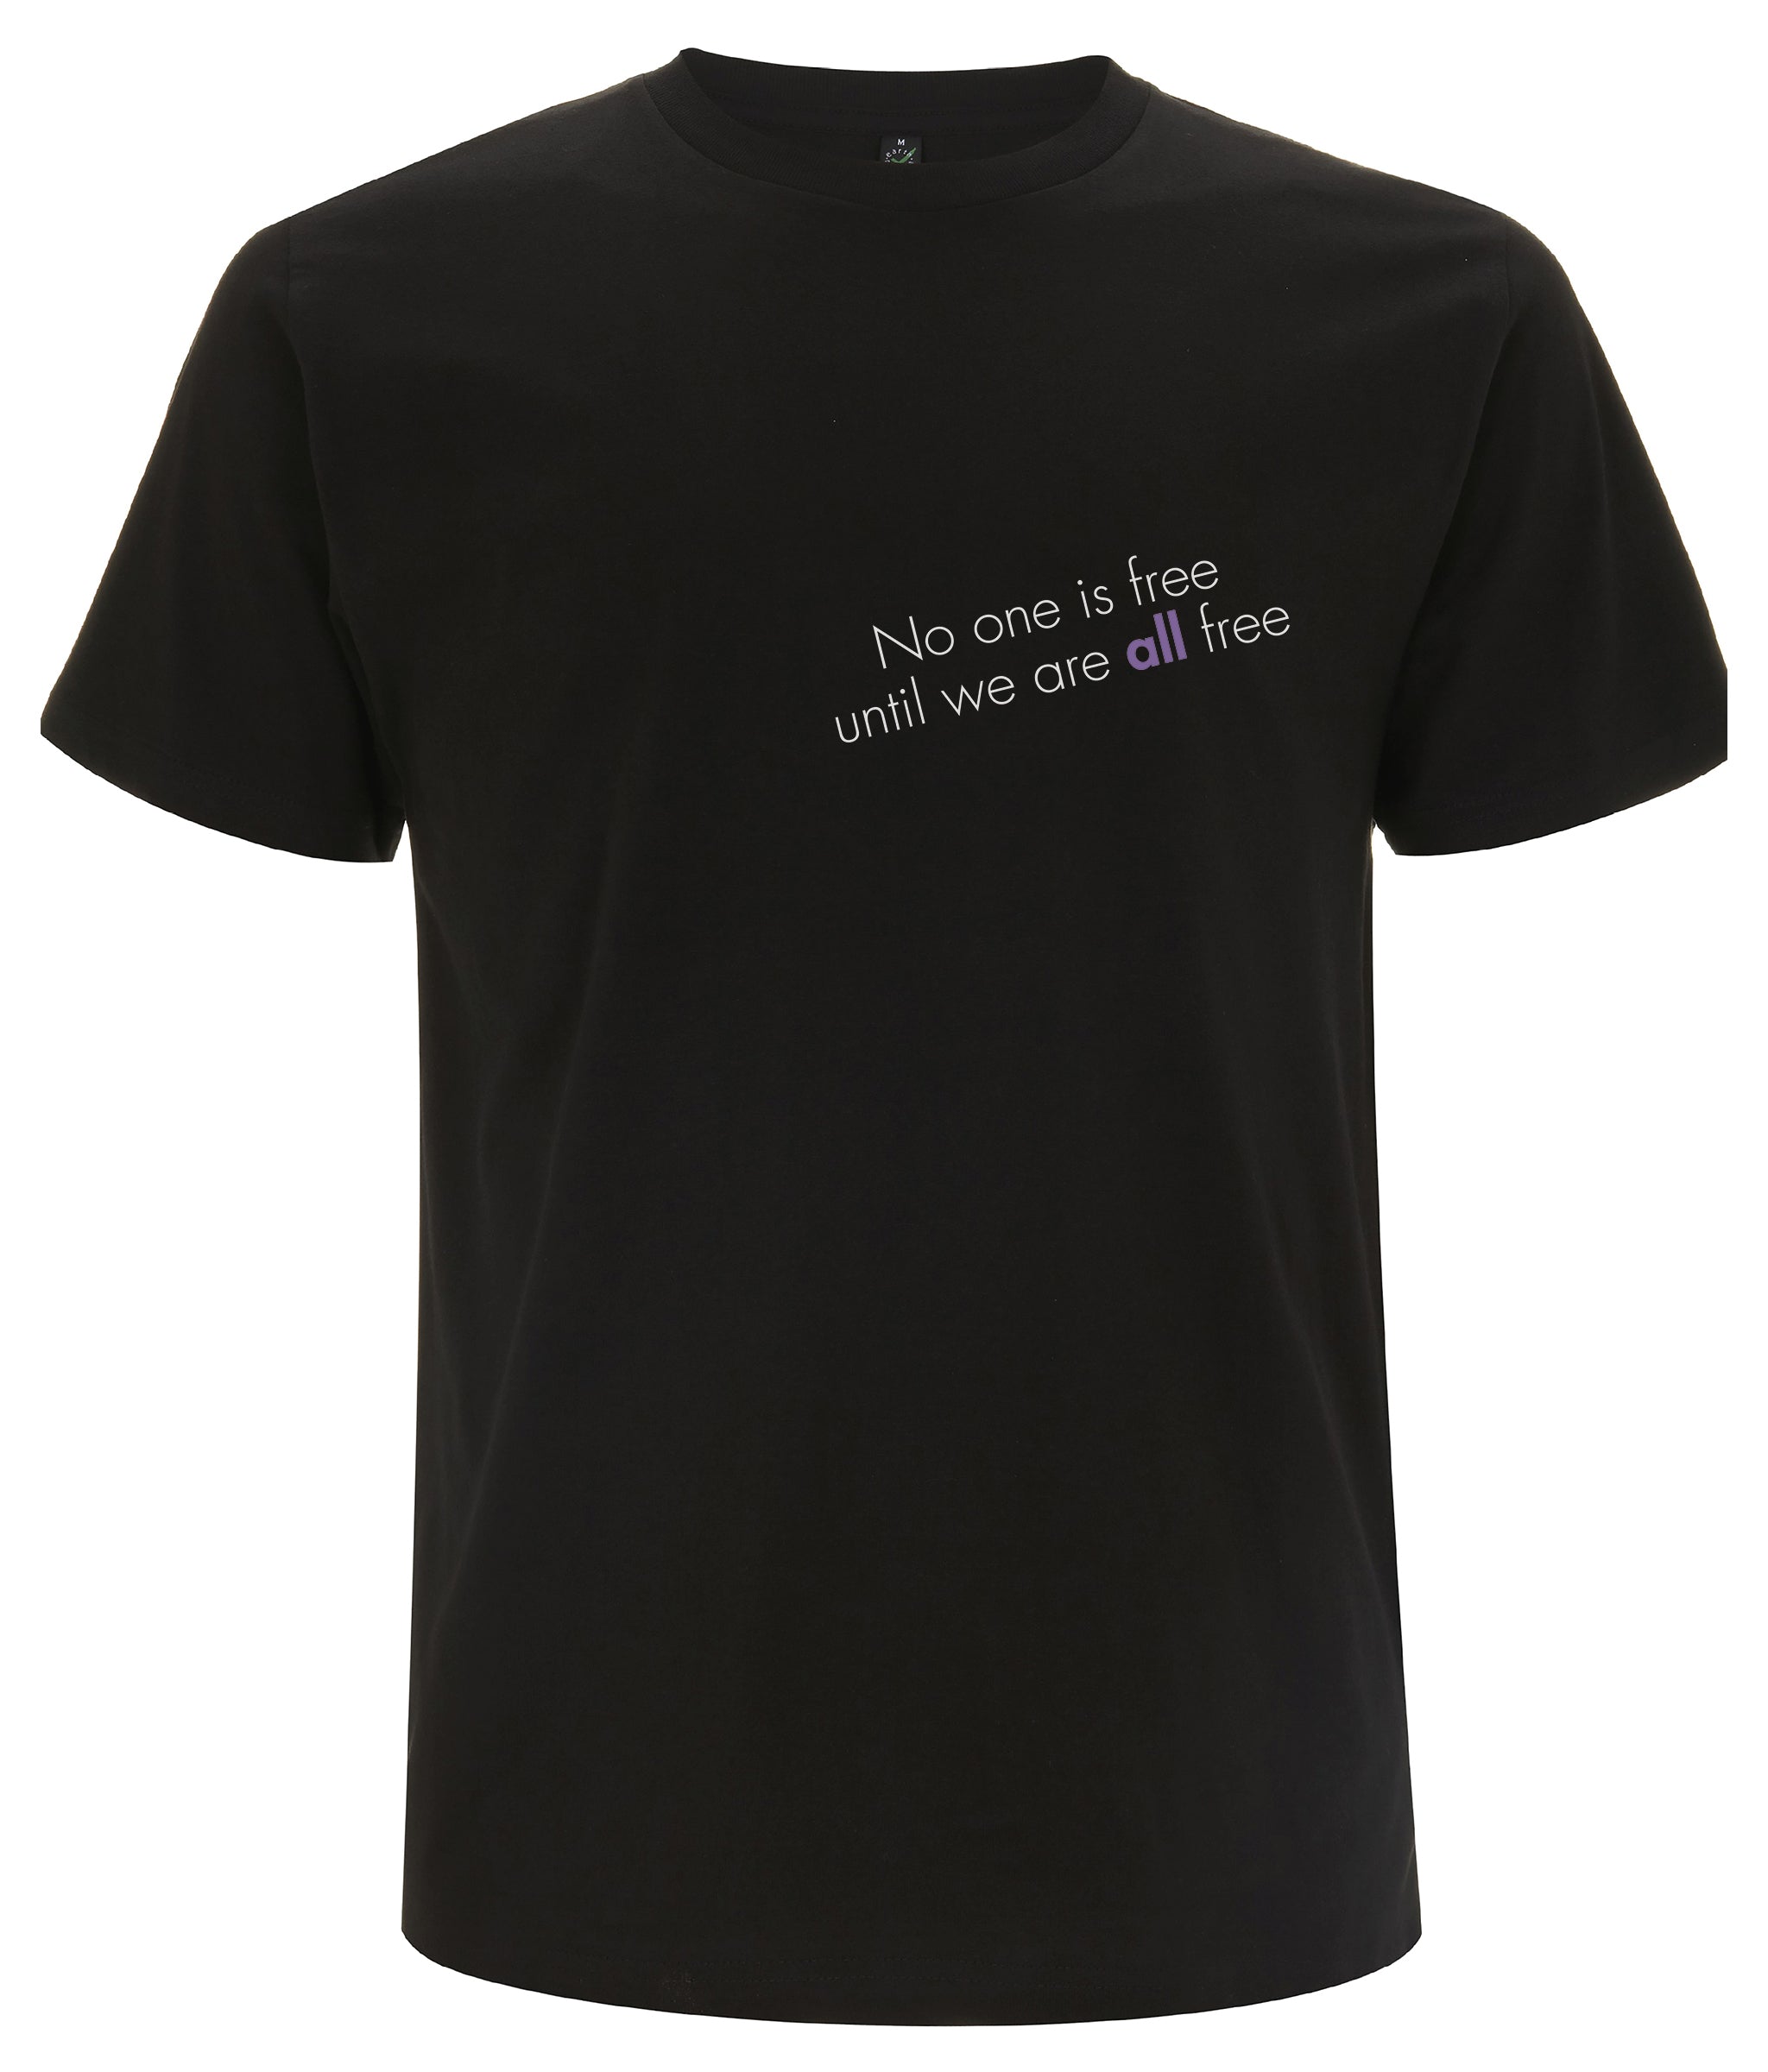 Feminist T Shirt - No One Is Free Until We Are All Free, Tilted